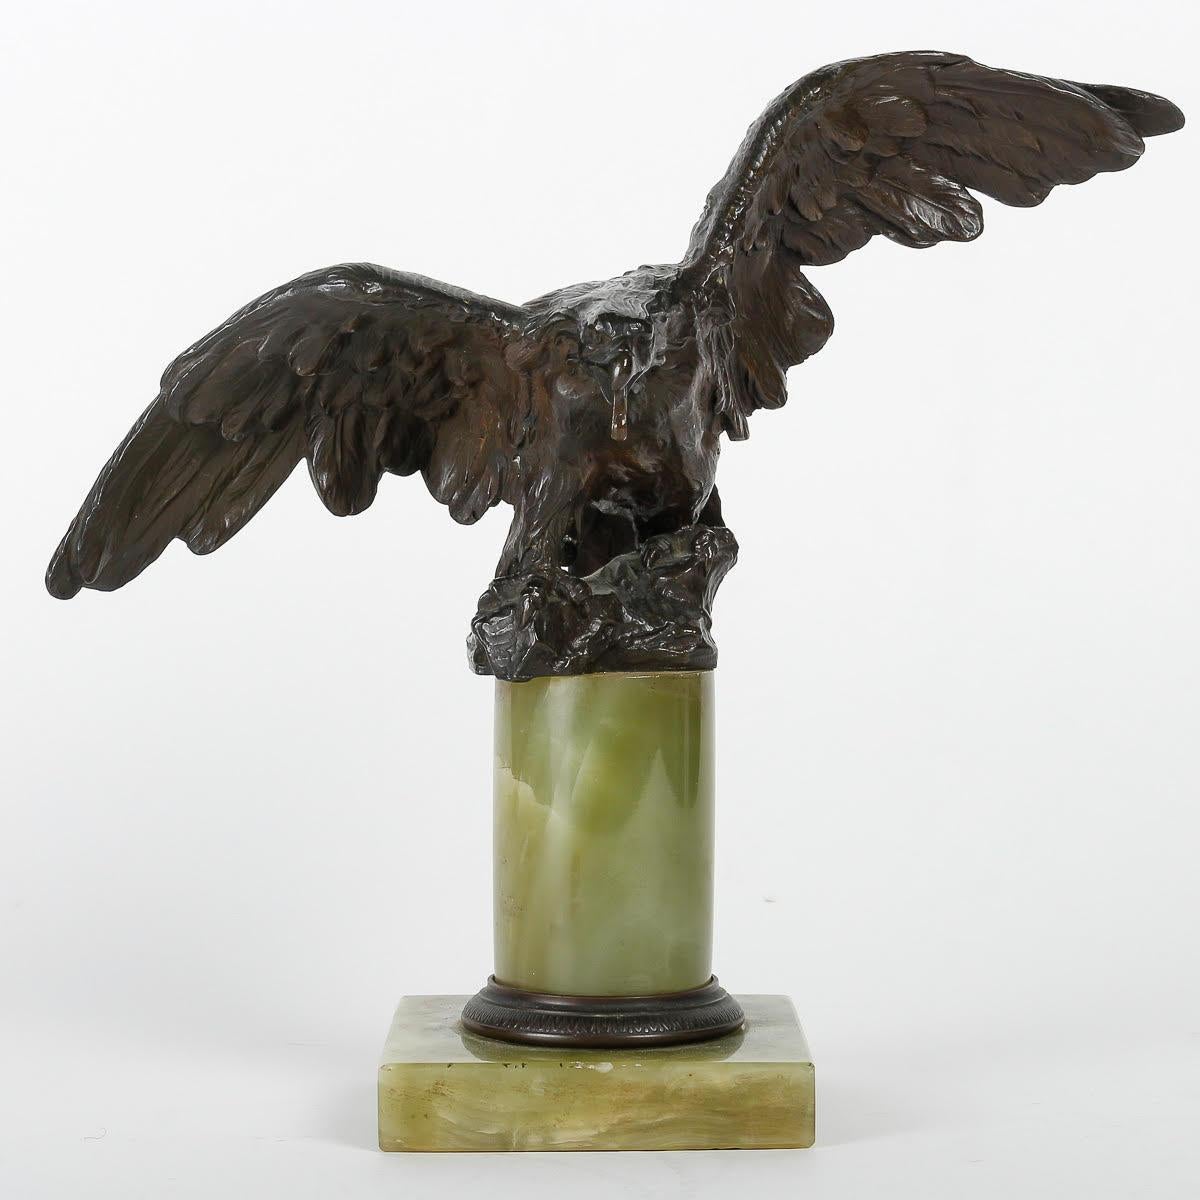 Empire style watch-holder, 19th century, Napoleon III period.

Empire style patinated bronze and onyx watch-holder, 19th century, Napoleon III period.

H: 26cm, W: 29cm, D: 15cm